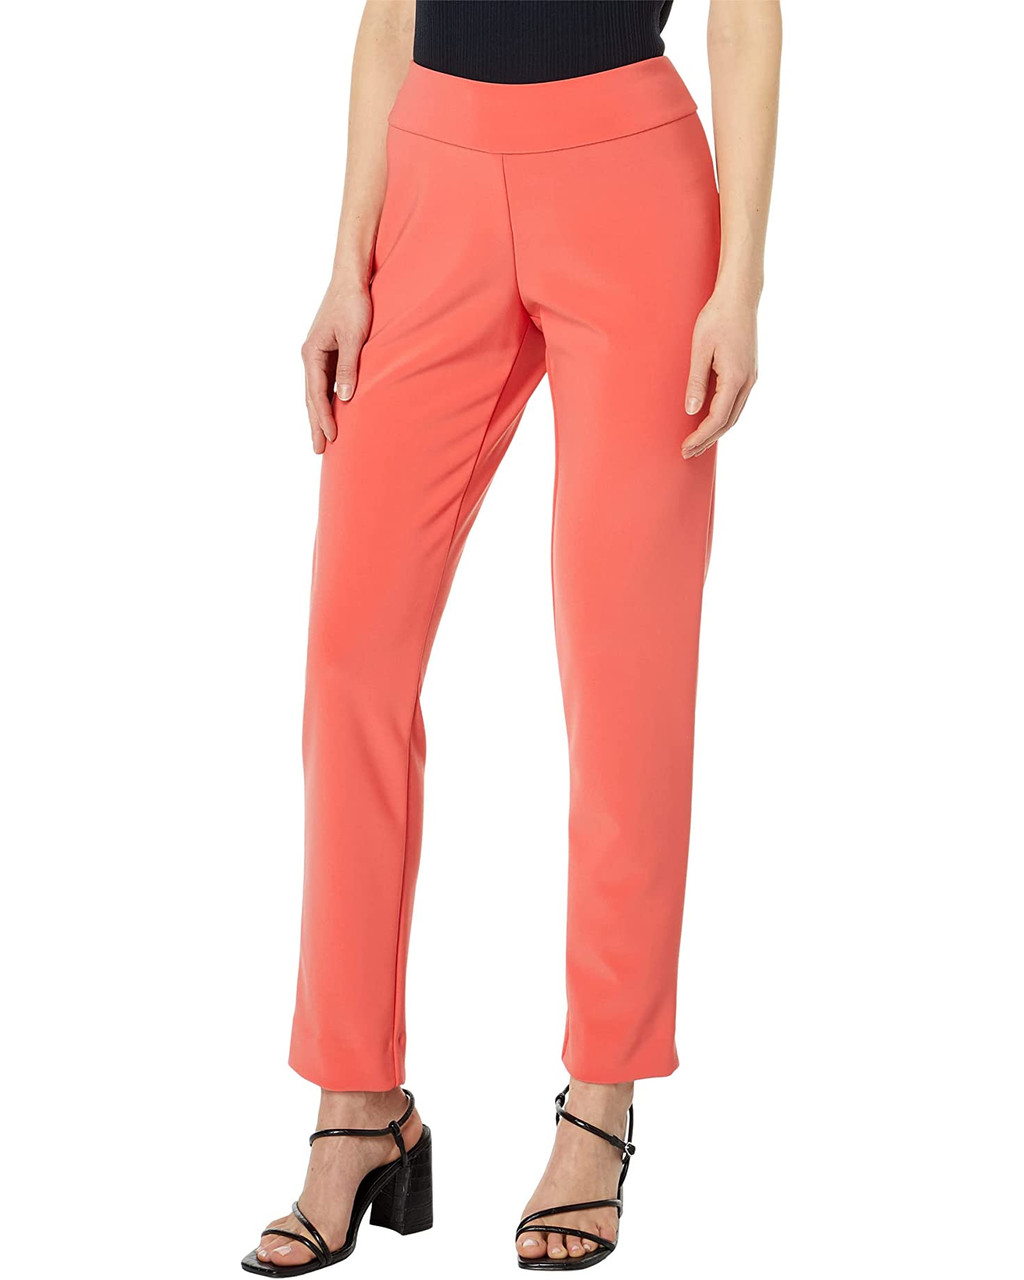 Start Me Up Coral/White Wide Leg Pants - Style a Go-Go